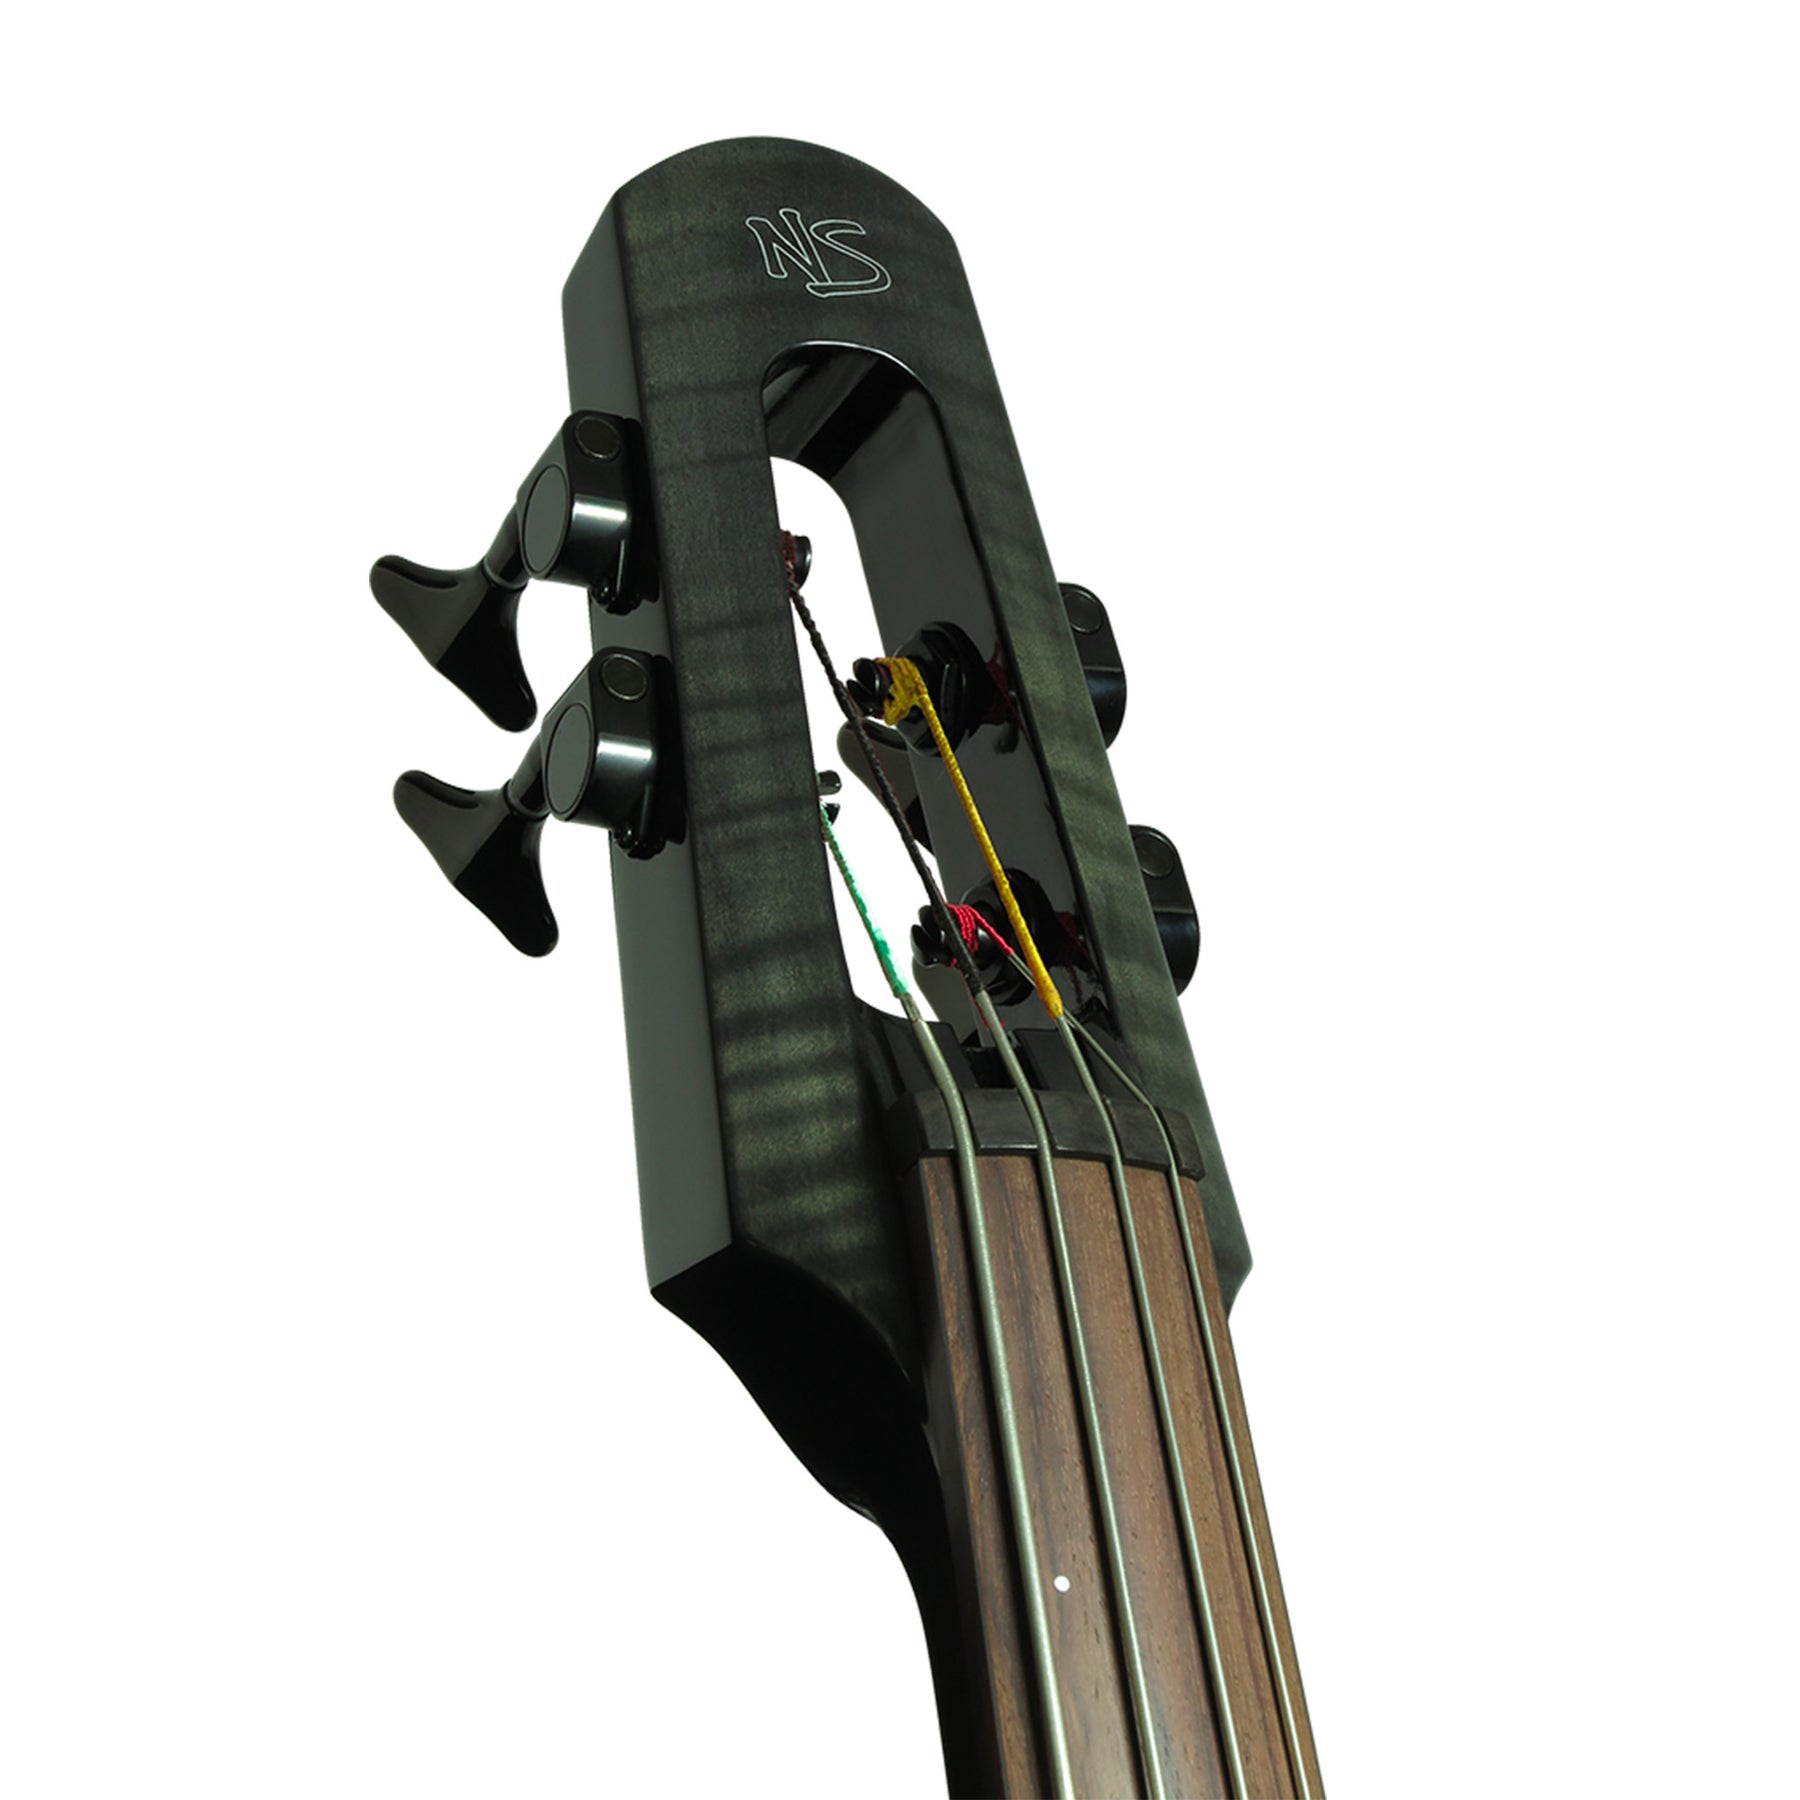 NS Design WAV 4-string Electric Double Bass